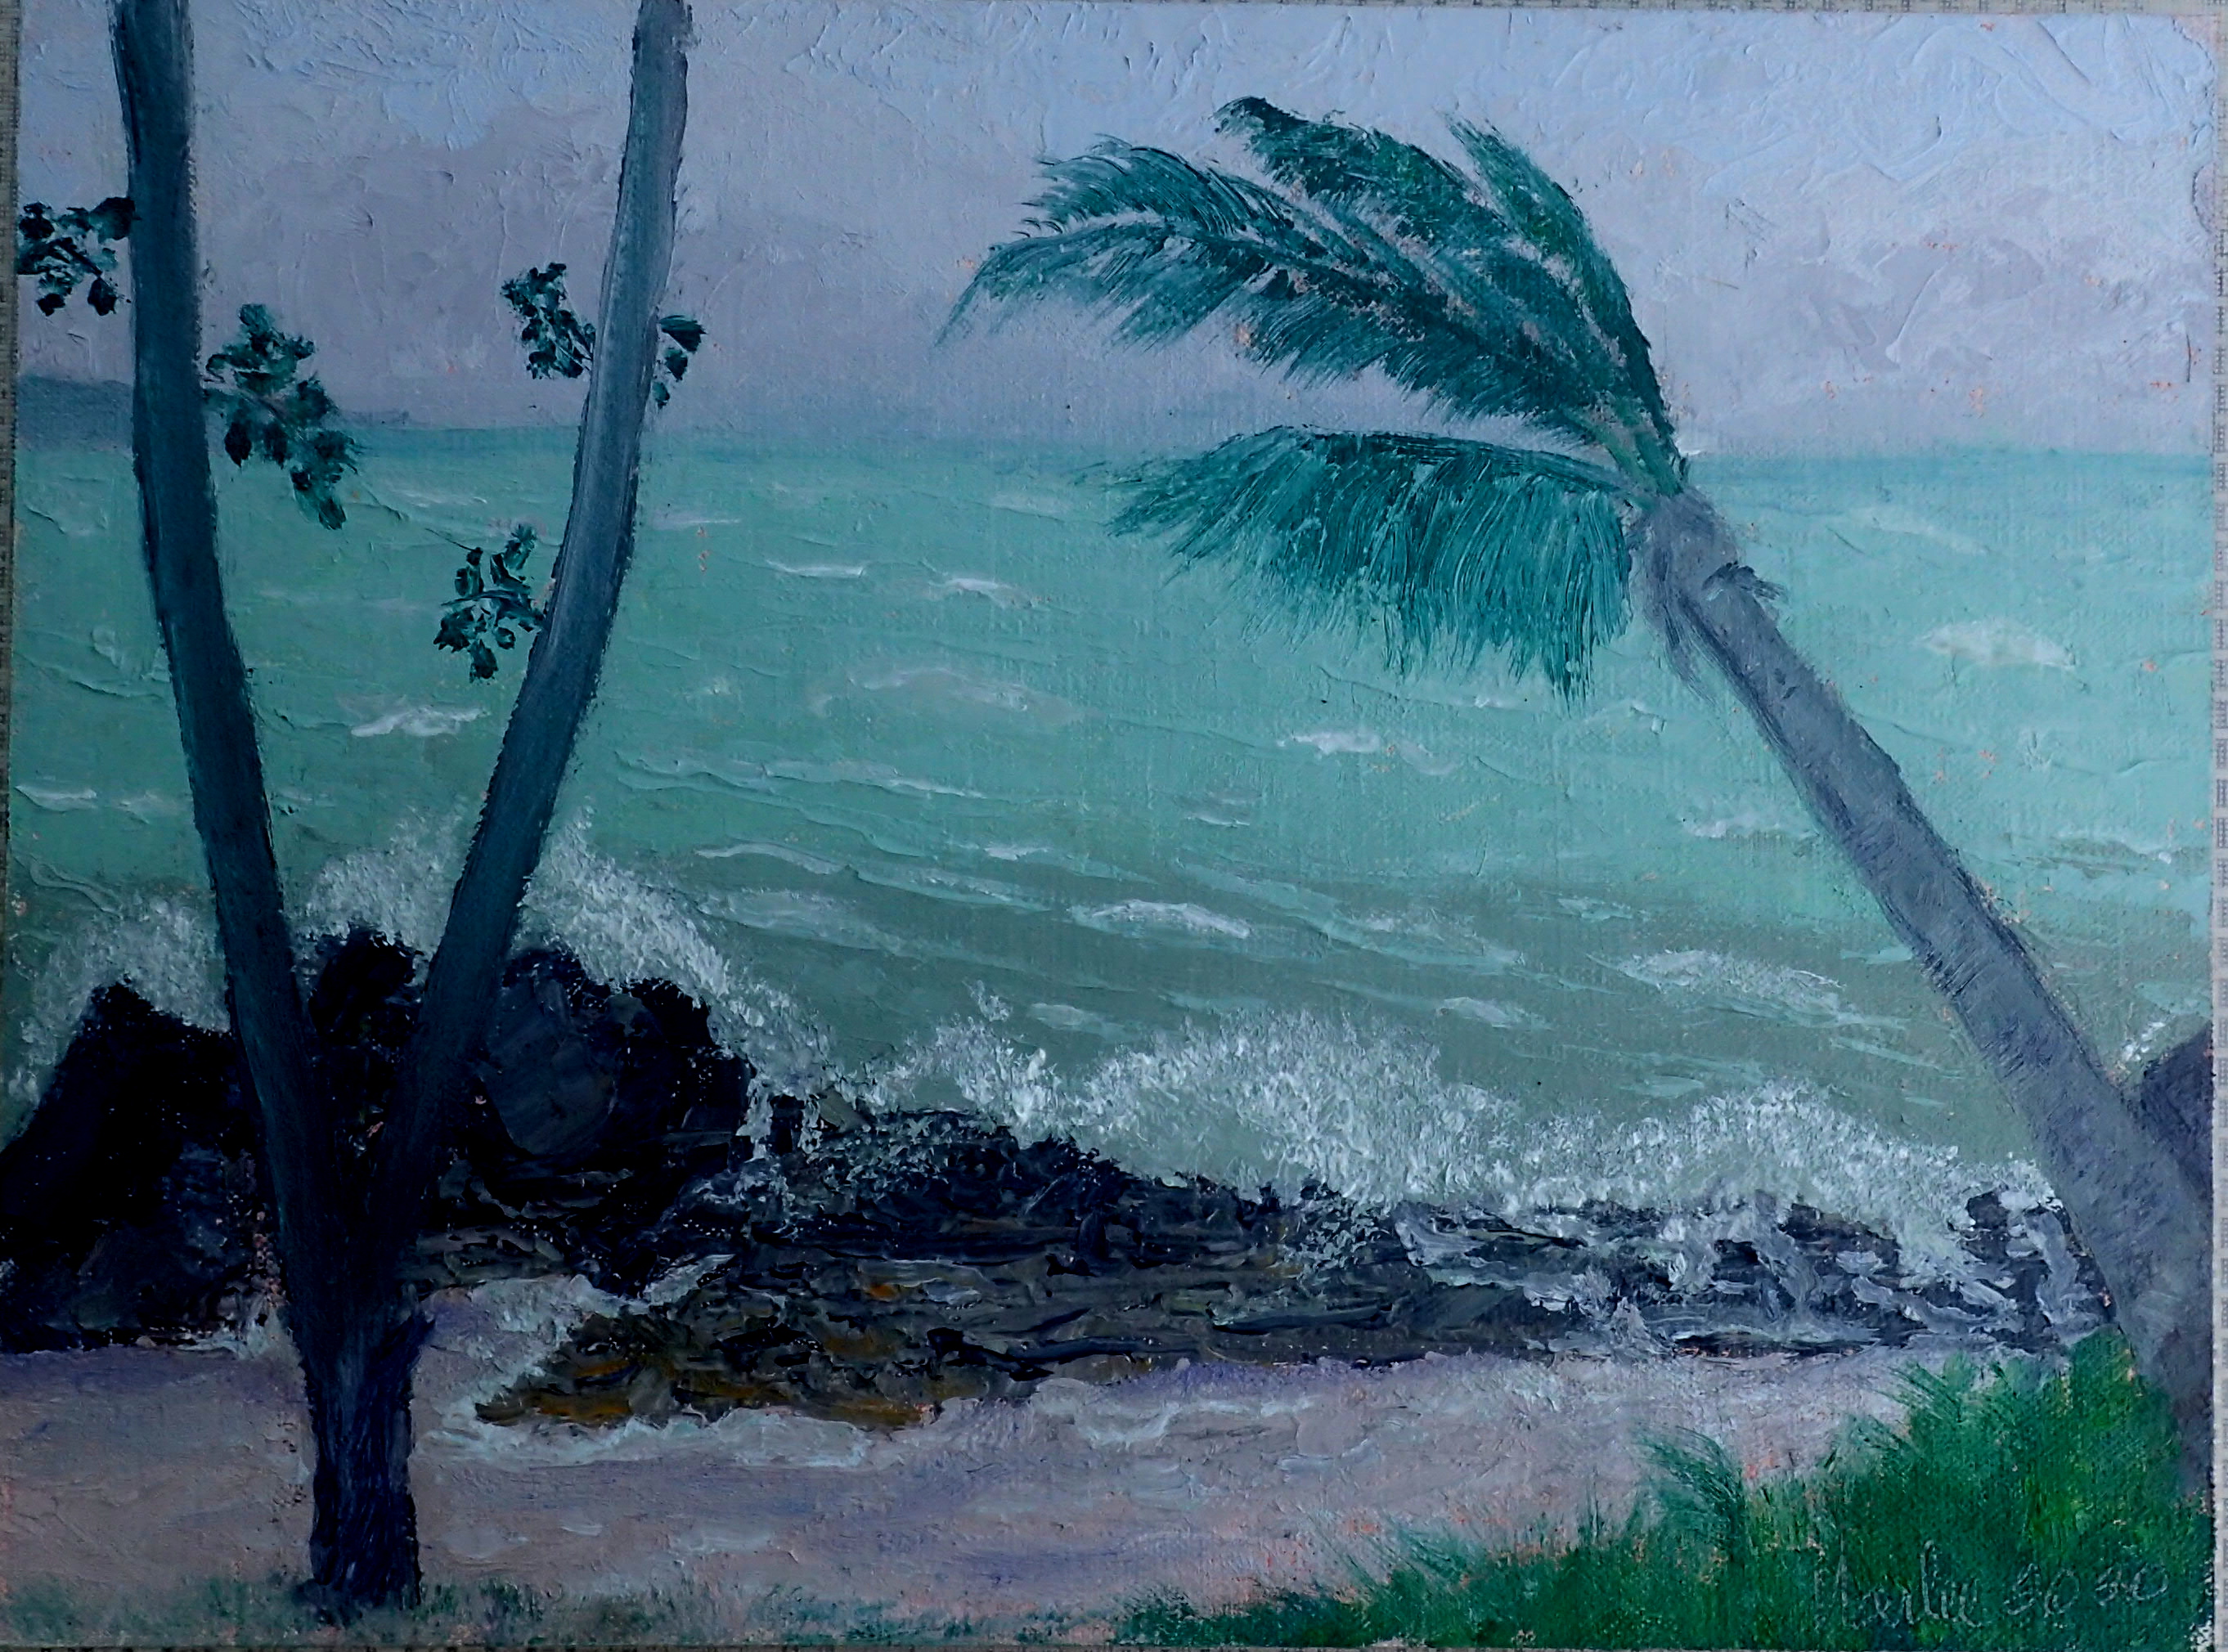 9x12 Original Oil on Linen Canvas © Marlee Mason As the first Hurricane of 2020 approached the Abacos we were spared a direct hit and experienced only tropical storm force winds.   These easterly win